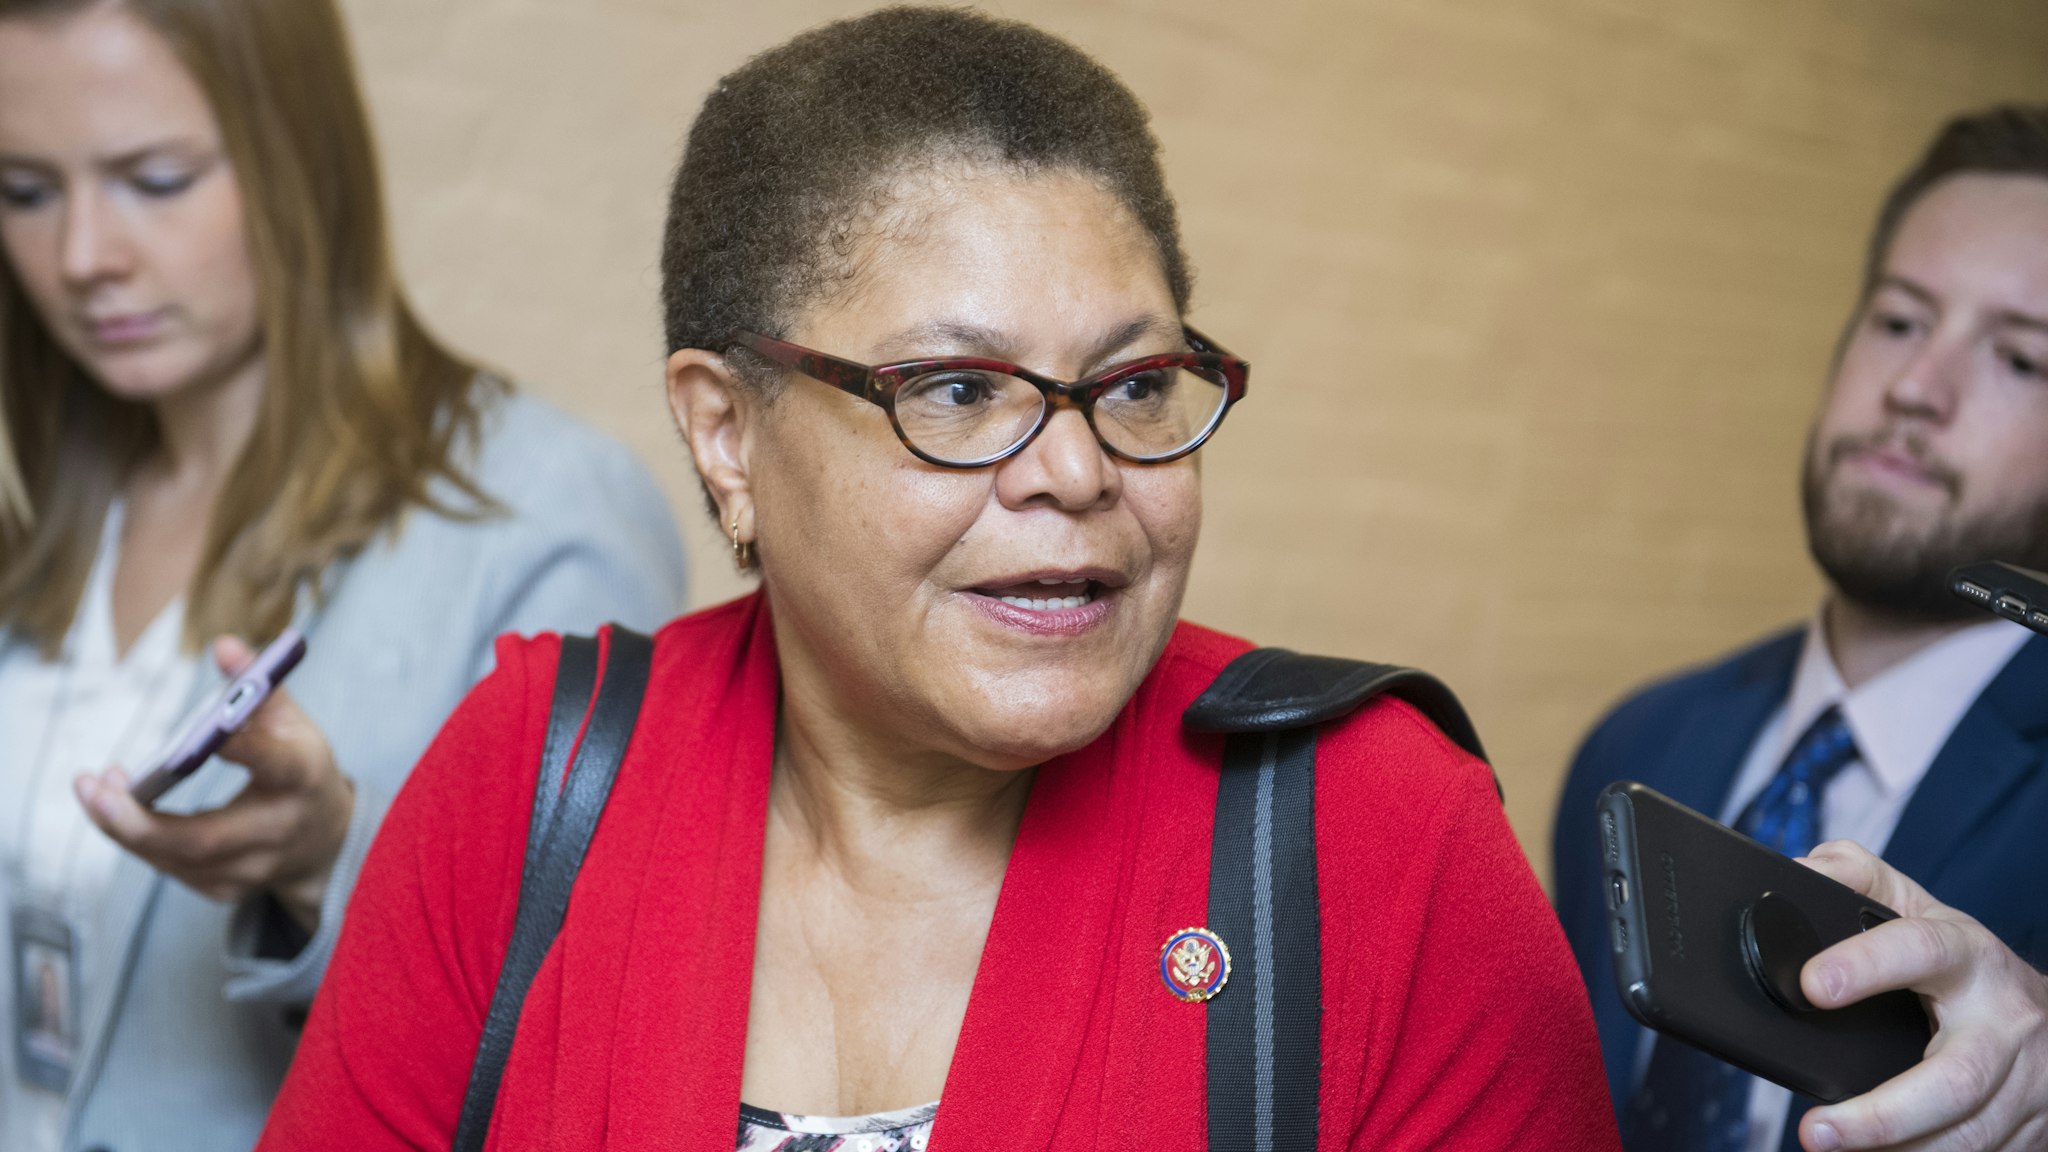 UNITED STATES - SEPTEMBER 25: Rep. Karen Bass, D-Calif., leaves a meeting with the House Democratic Caucus in the Capitol on Wednesday, September 25, 2019.